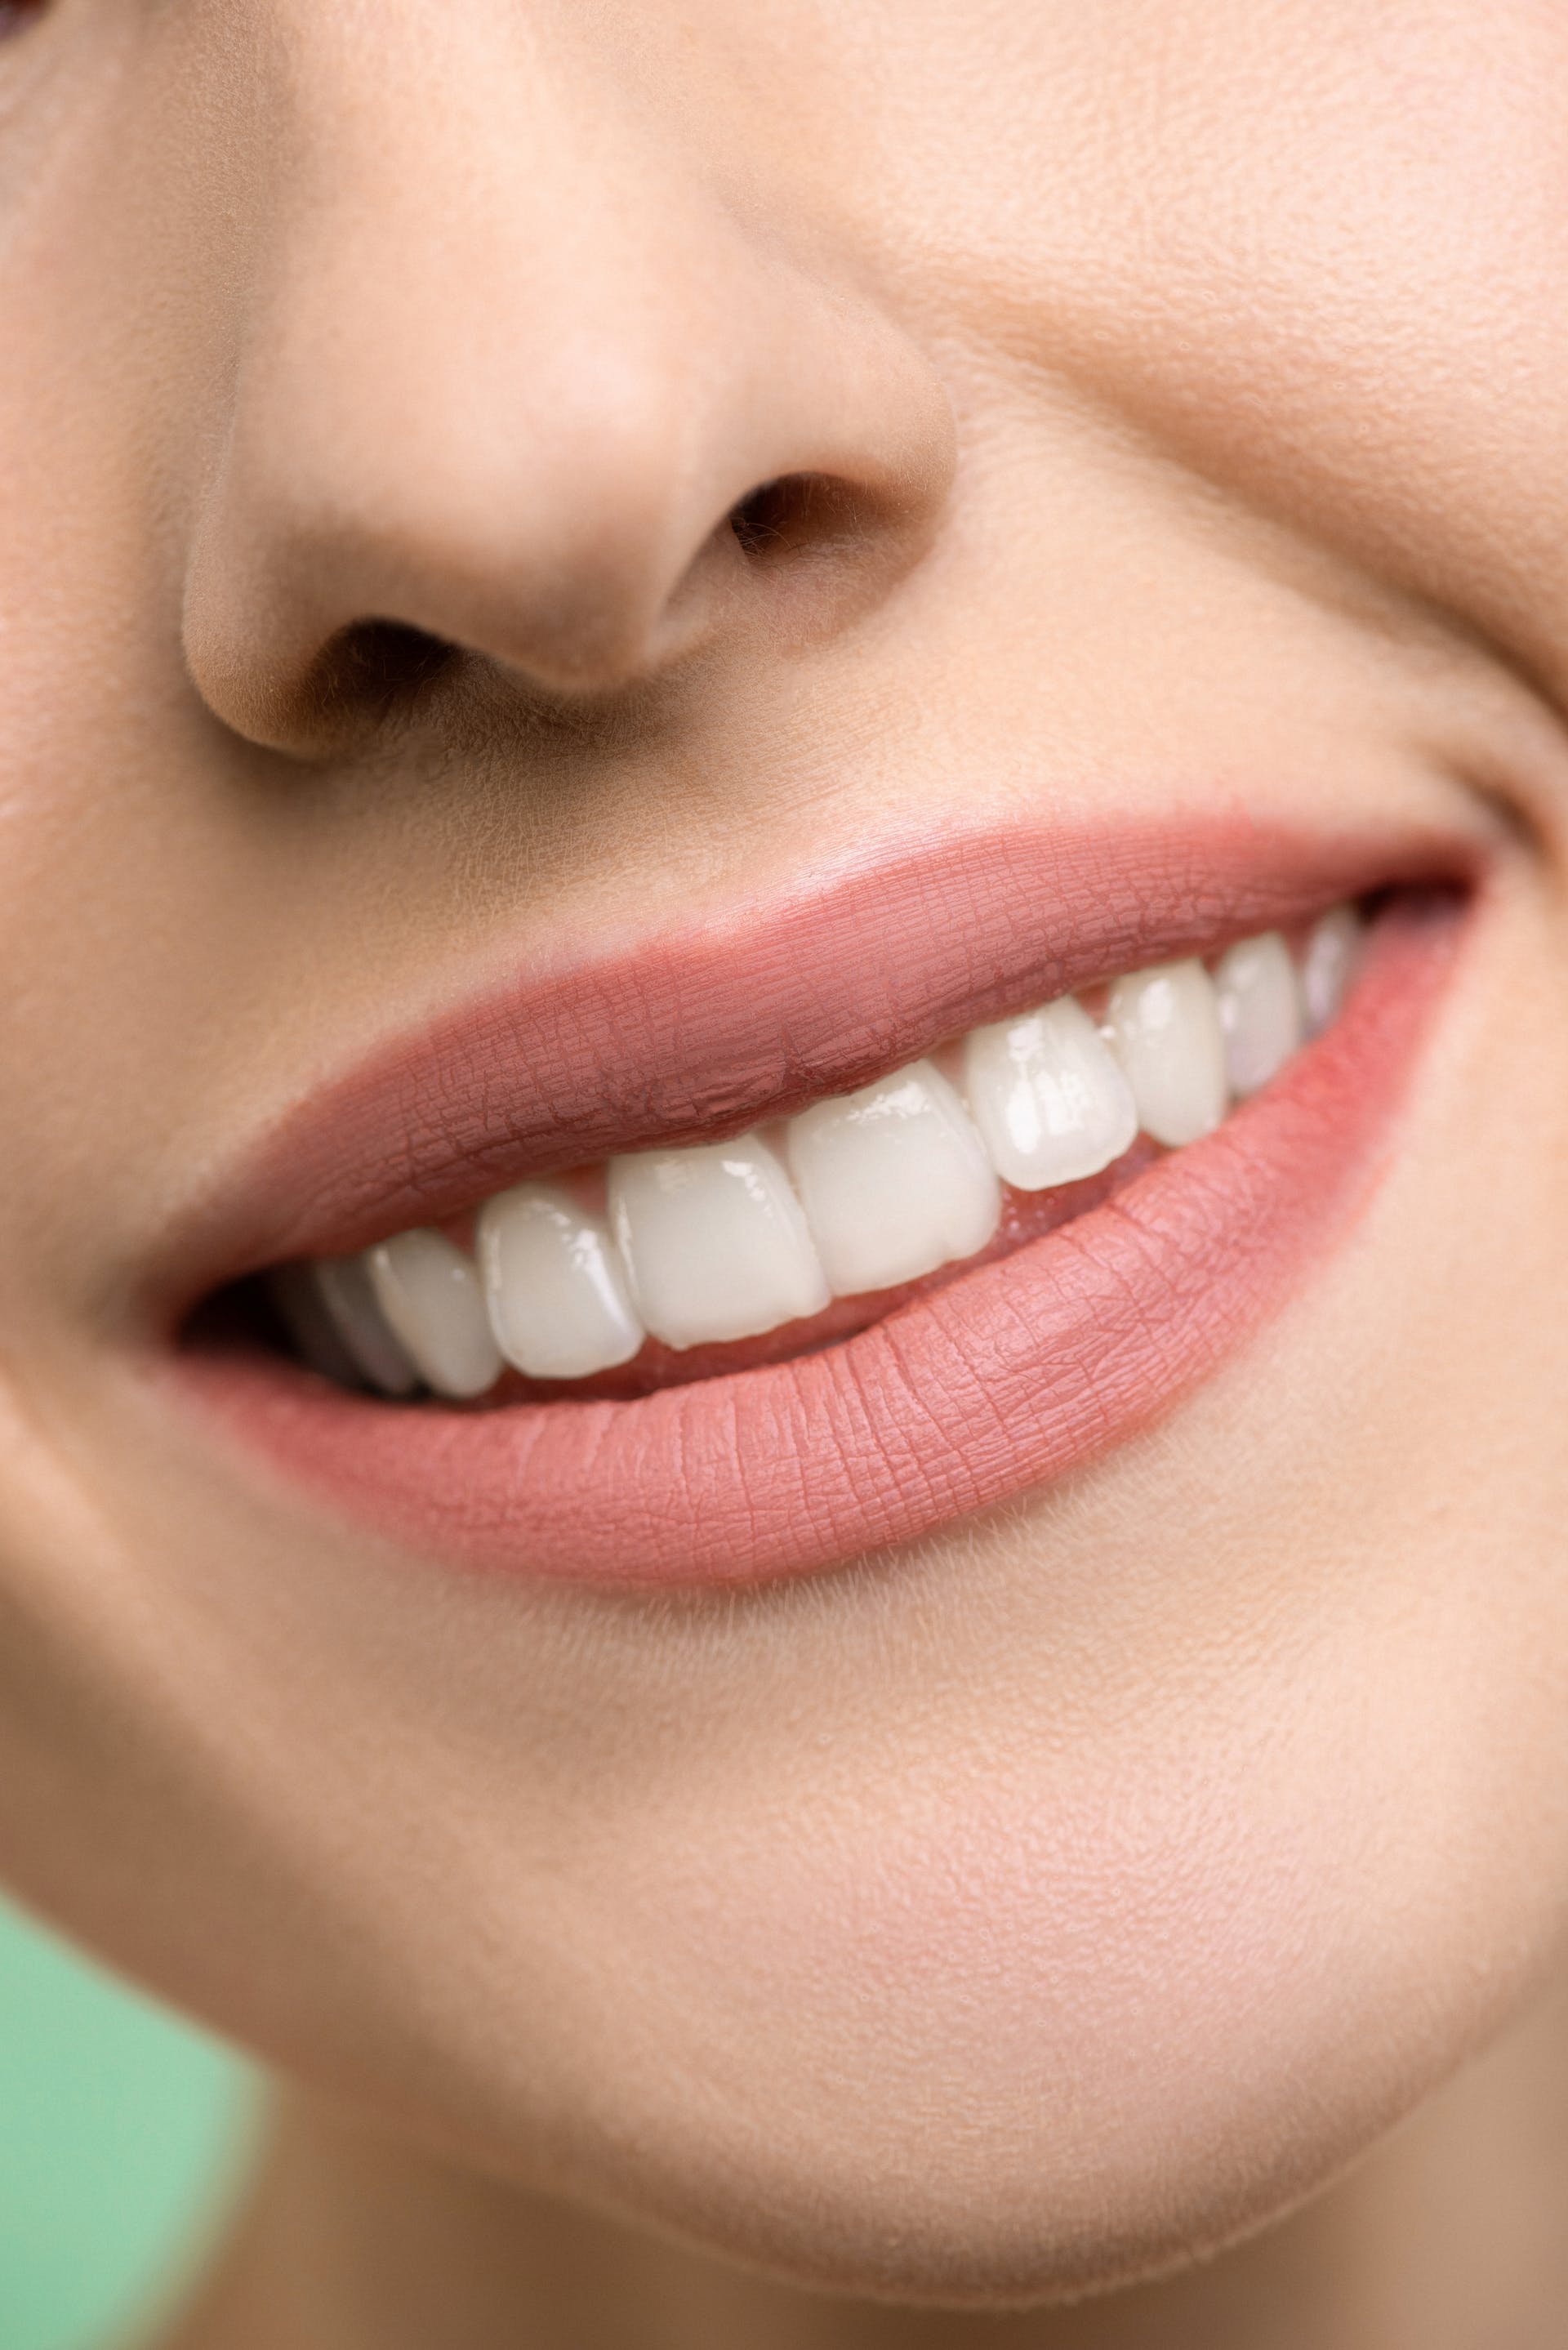 Close-up of a woman's smile | Source: Pexels